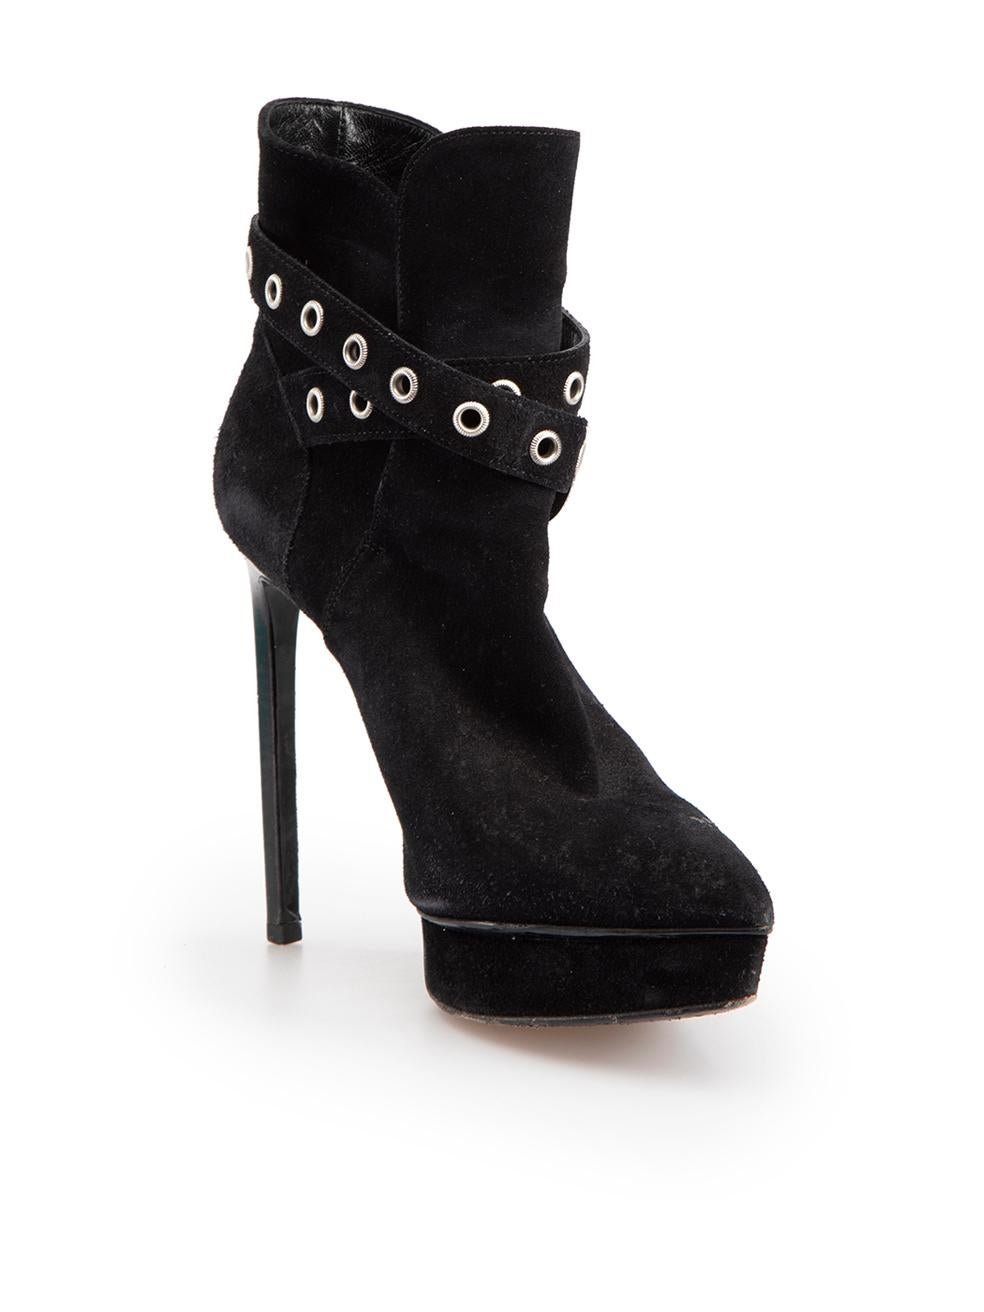 CONDITION is Good. General wear to boots is evident. Moderate signs of wear to both boot toes and heels with abrasions to the suede on this used Saint Laurent designer resale item.
 
 Details
 Black
 Suede
 Boots
 High heeled
 Point toe
 Buckle